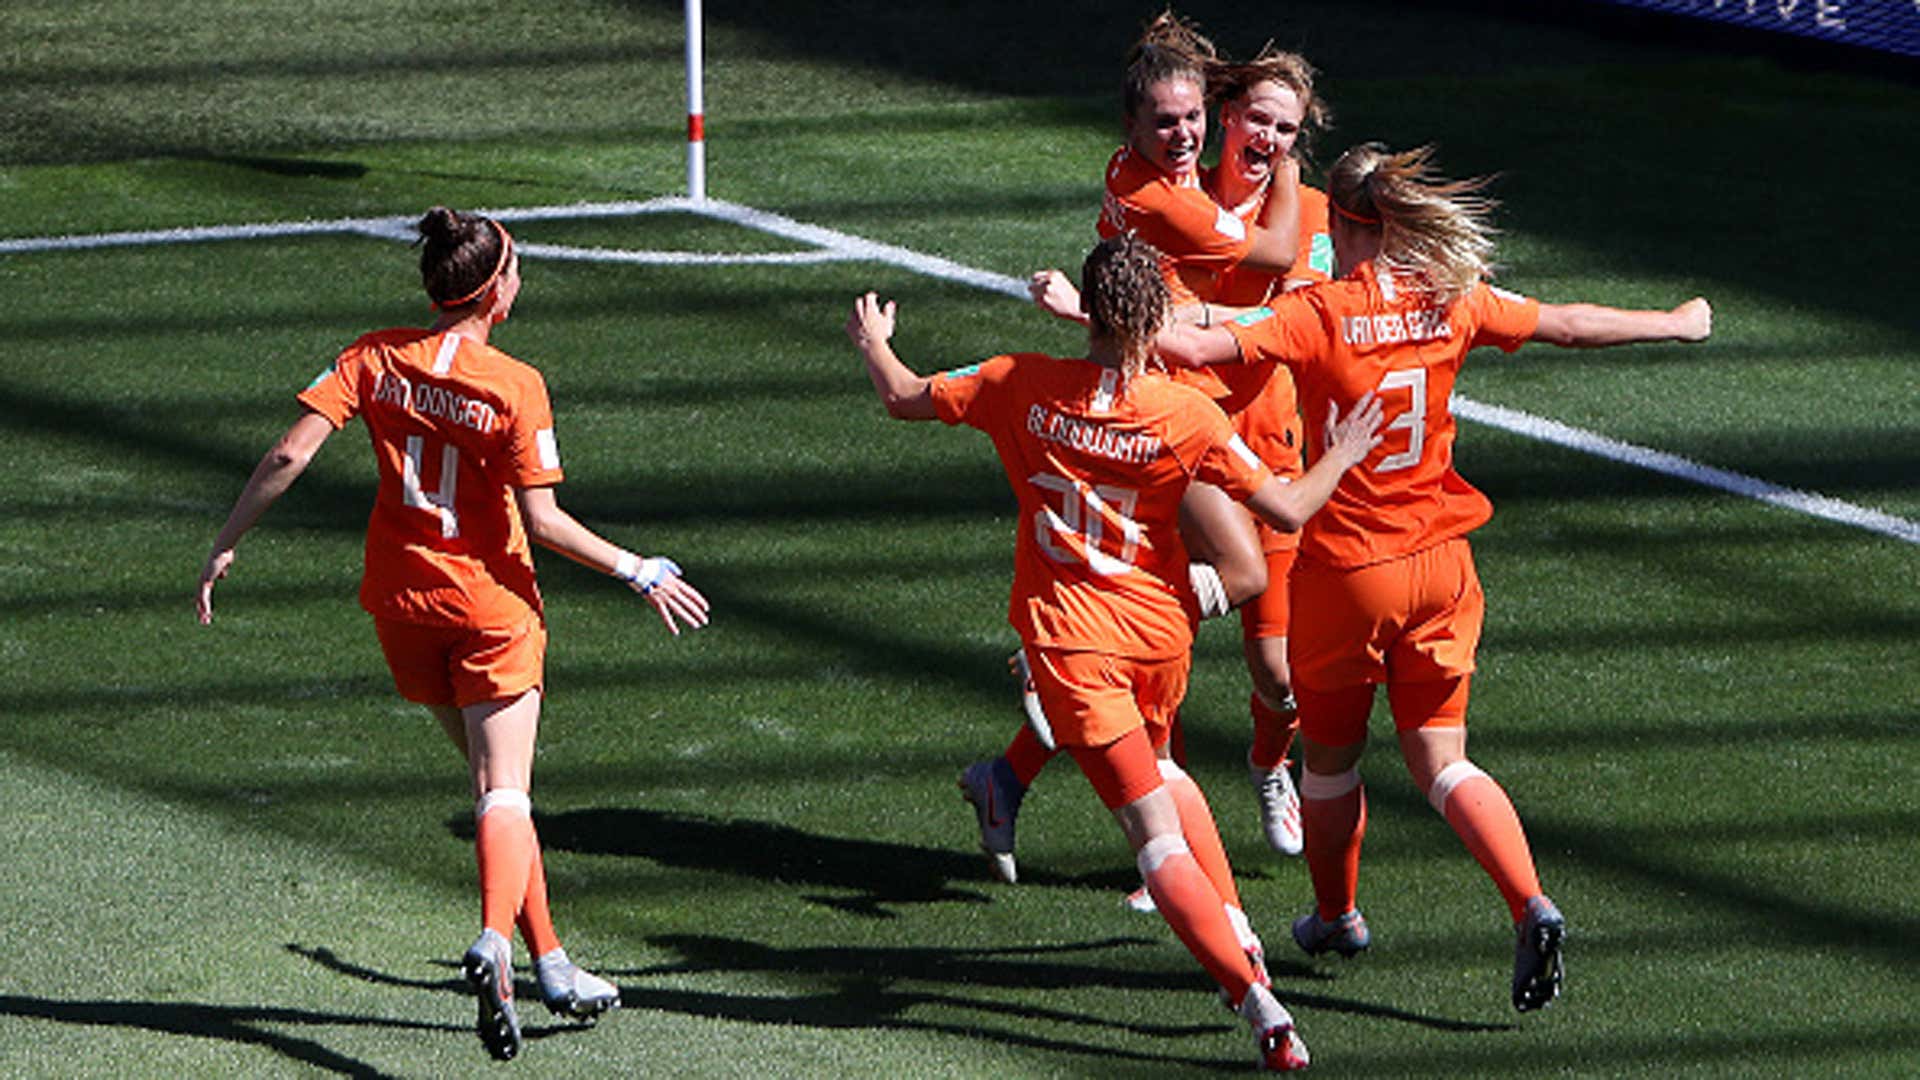 Netherlands Italy Women's World Cup